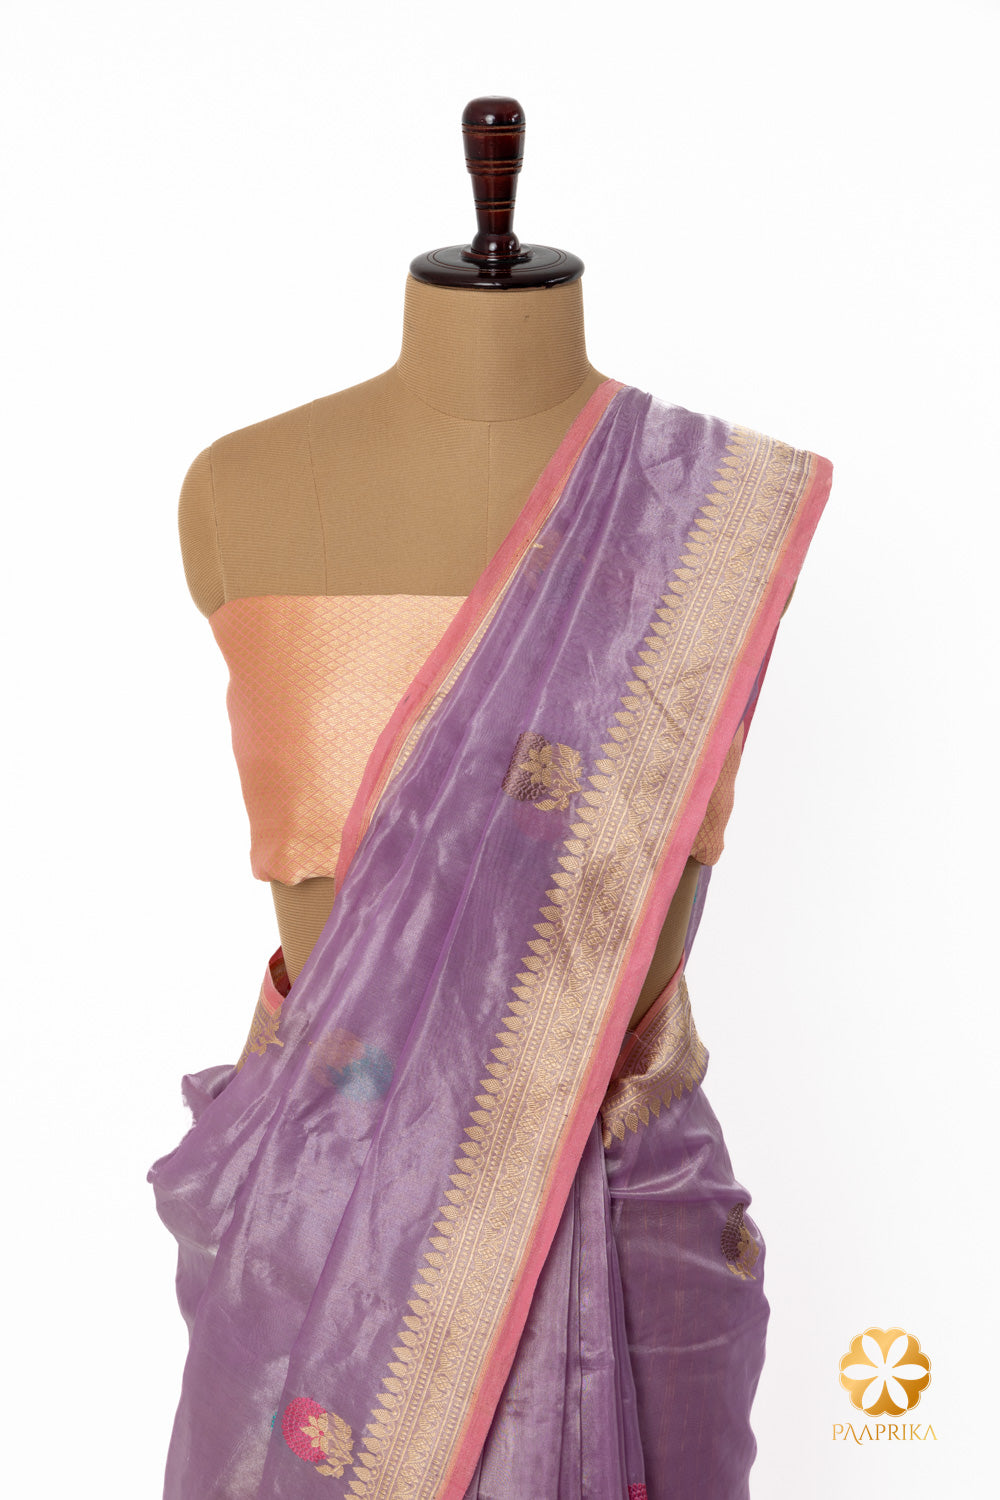 A blend of tradition and modernity in the lavender Banarasi Tissue Saree.